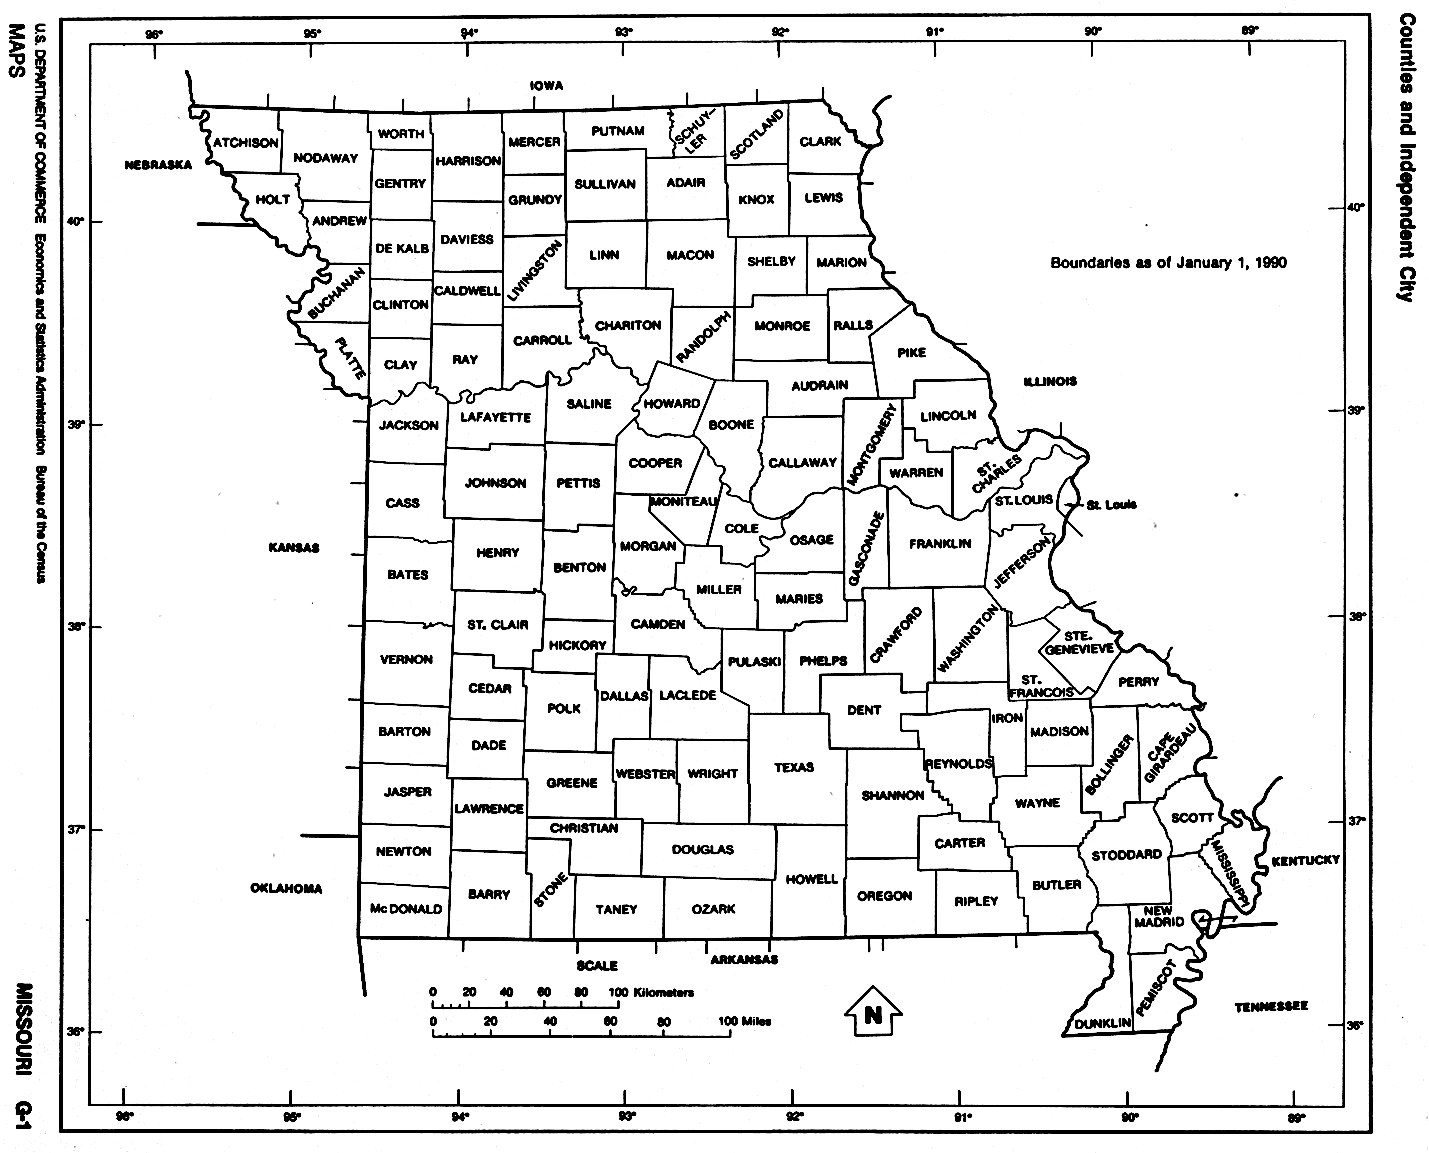 Missouri maps. Click on the Missouri Counties to view it full screen